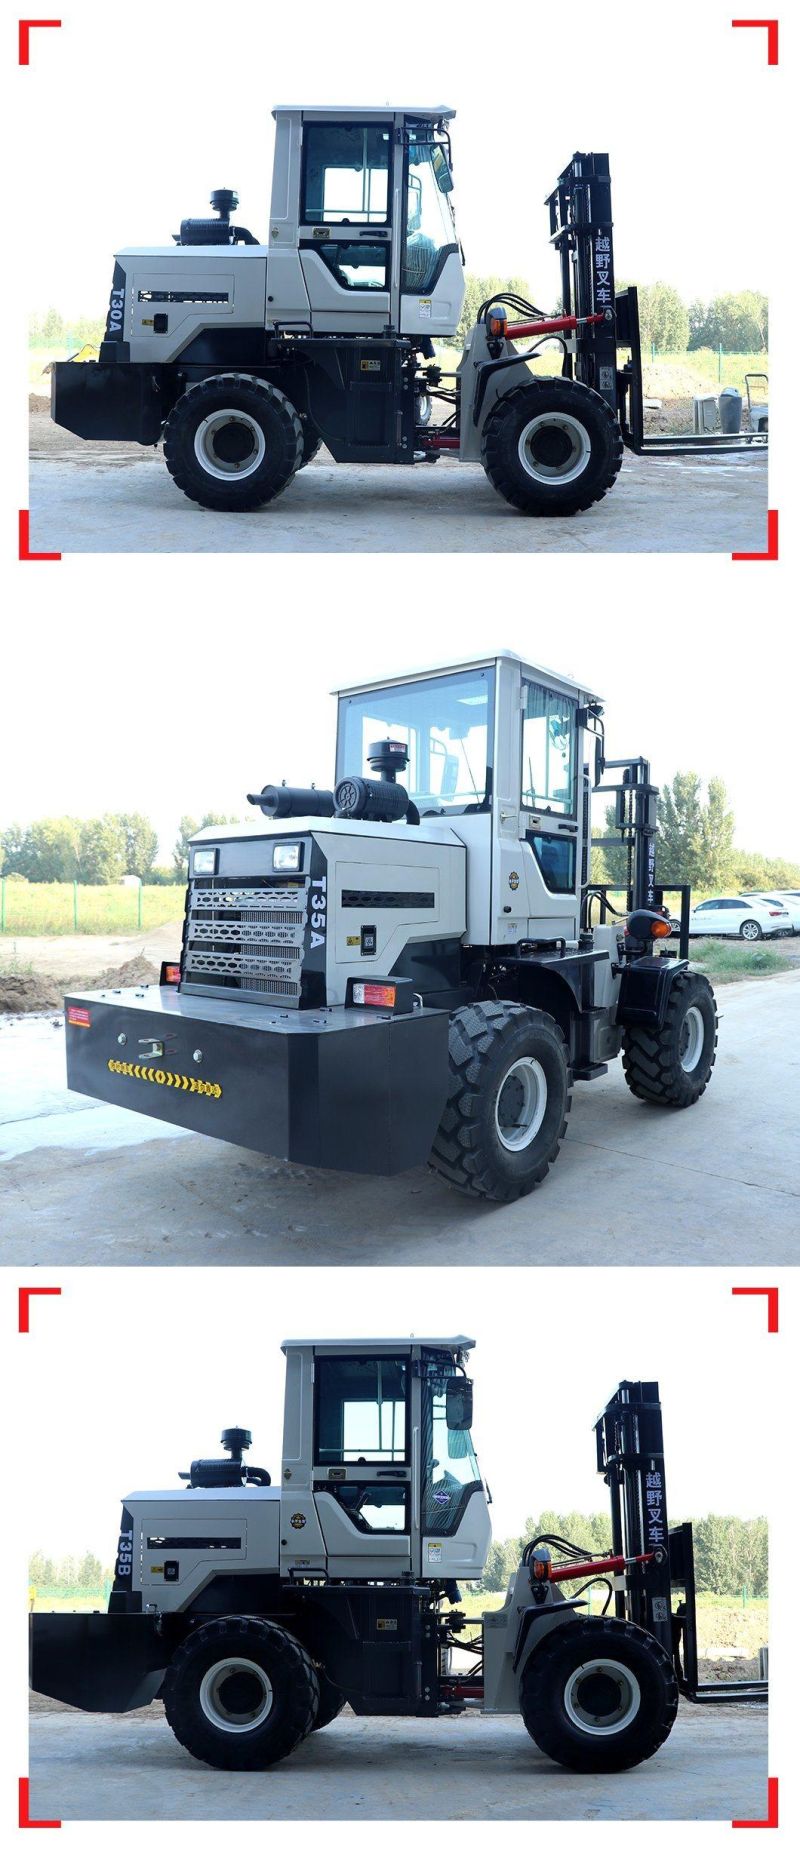 CE Chinese-Made Shandong Diesel Engine Raised 3 Meters Four Drive High Chassis Cross-Country Forklift for Sale